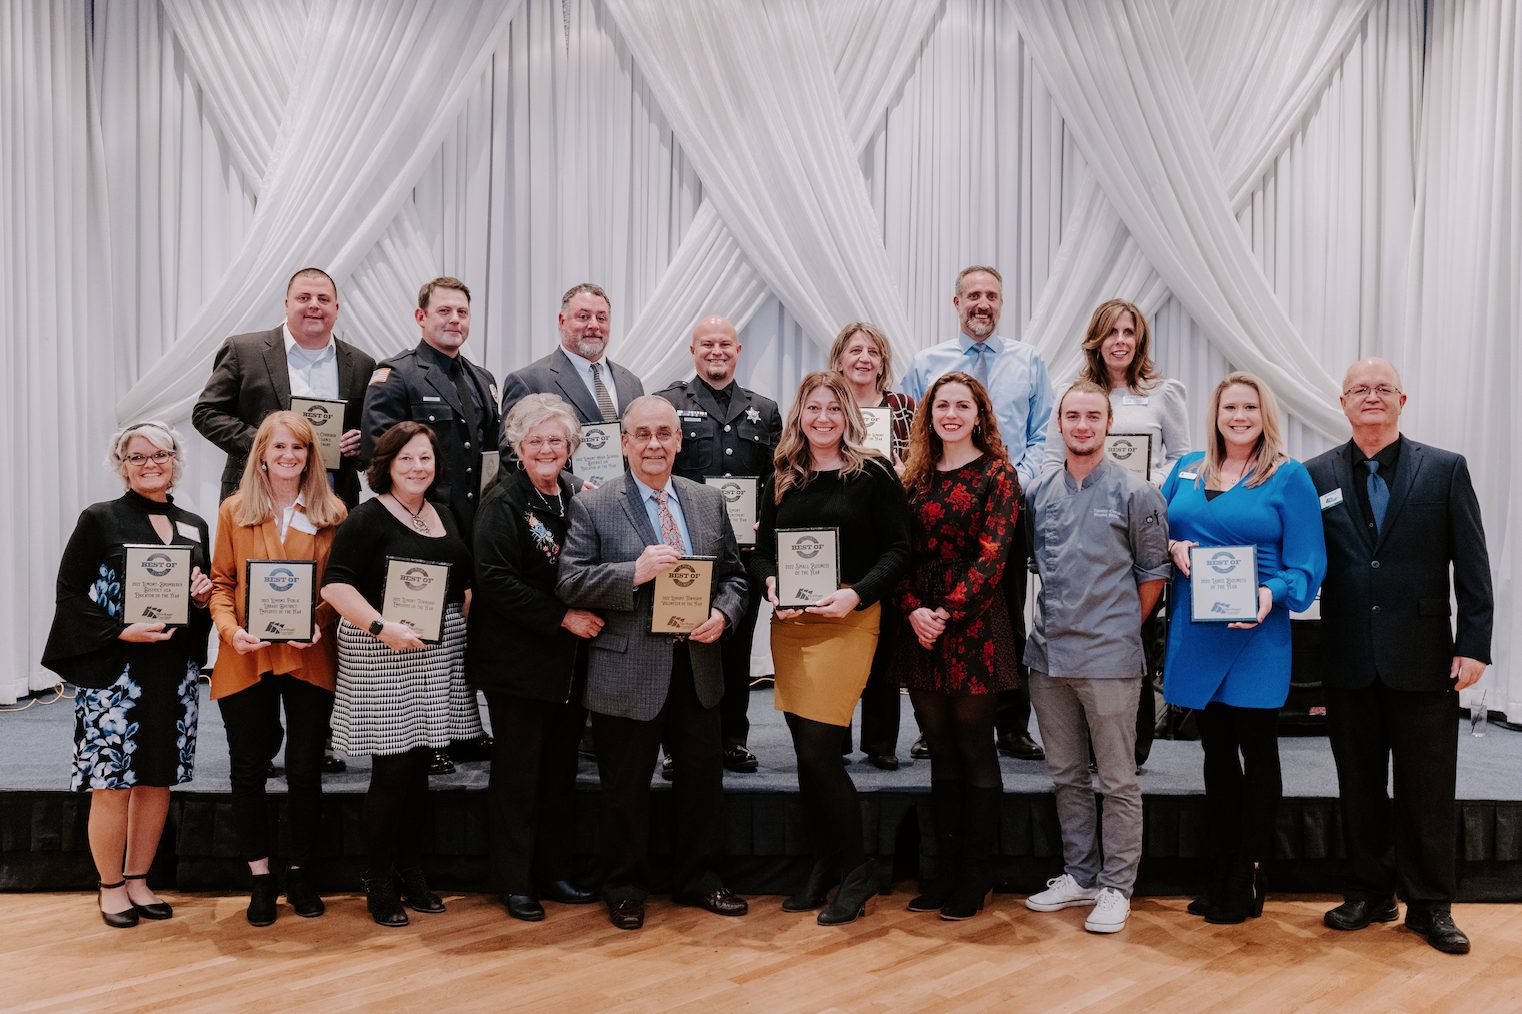 Winners of the 2022 Best of Lemont holding their plaques while celebrating at Crystal Grand Banquets in Lemont. The Best of Lemont is a celebration held by the Heritage Corridor Business Alliance.